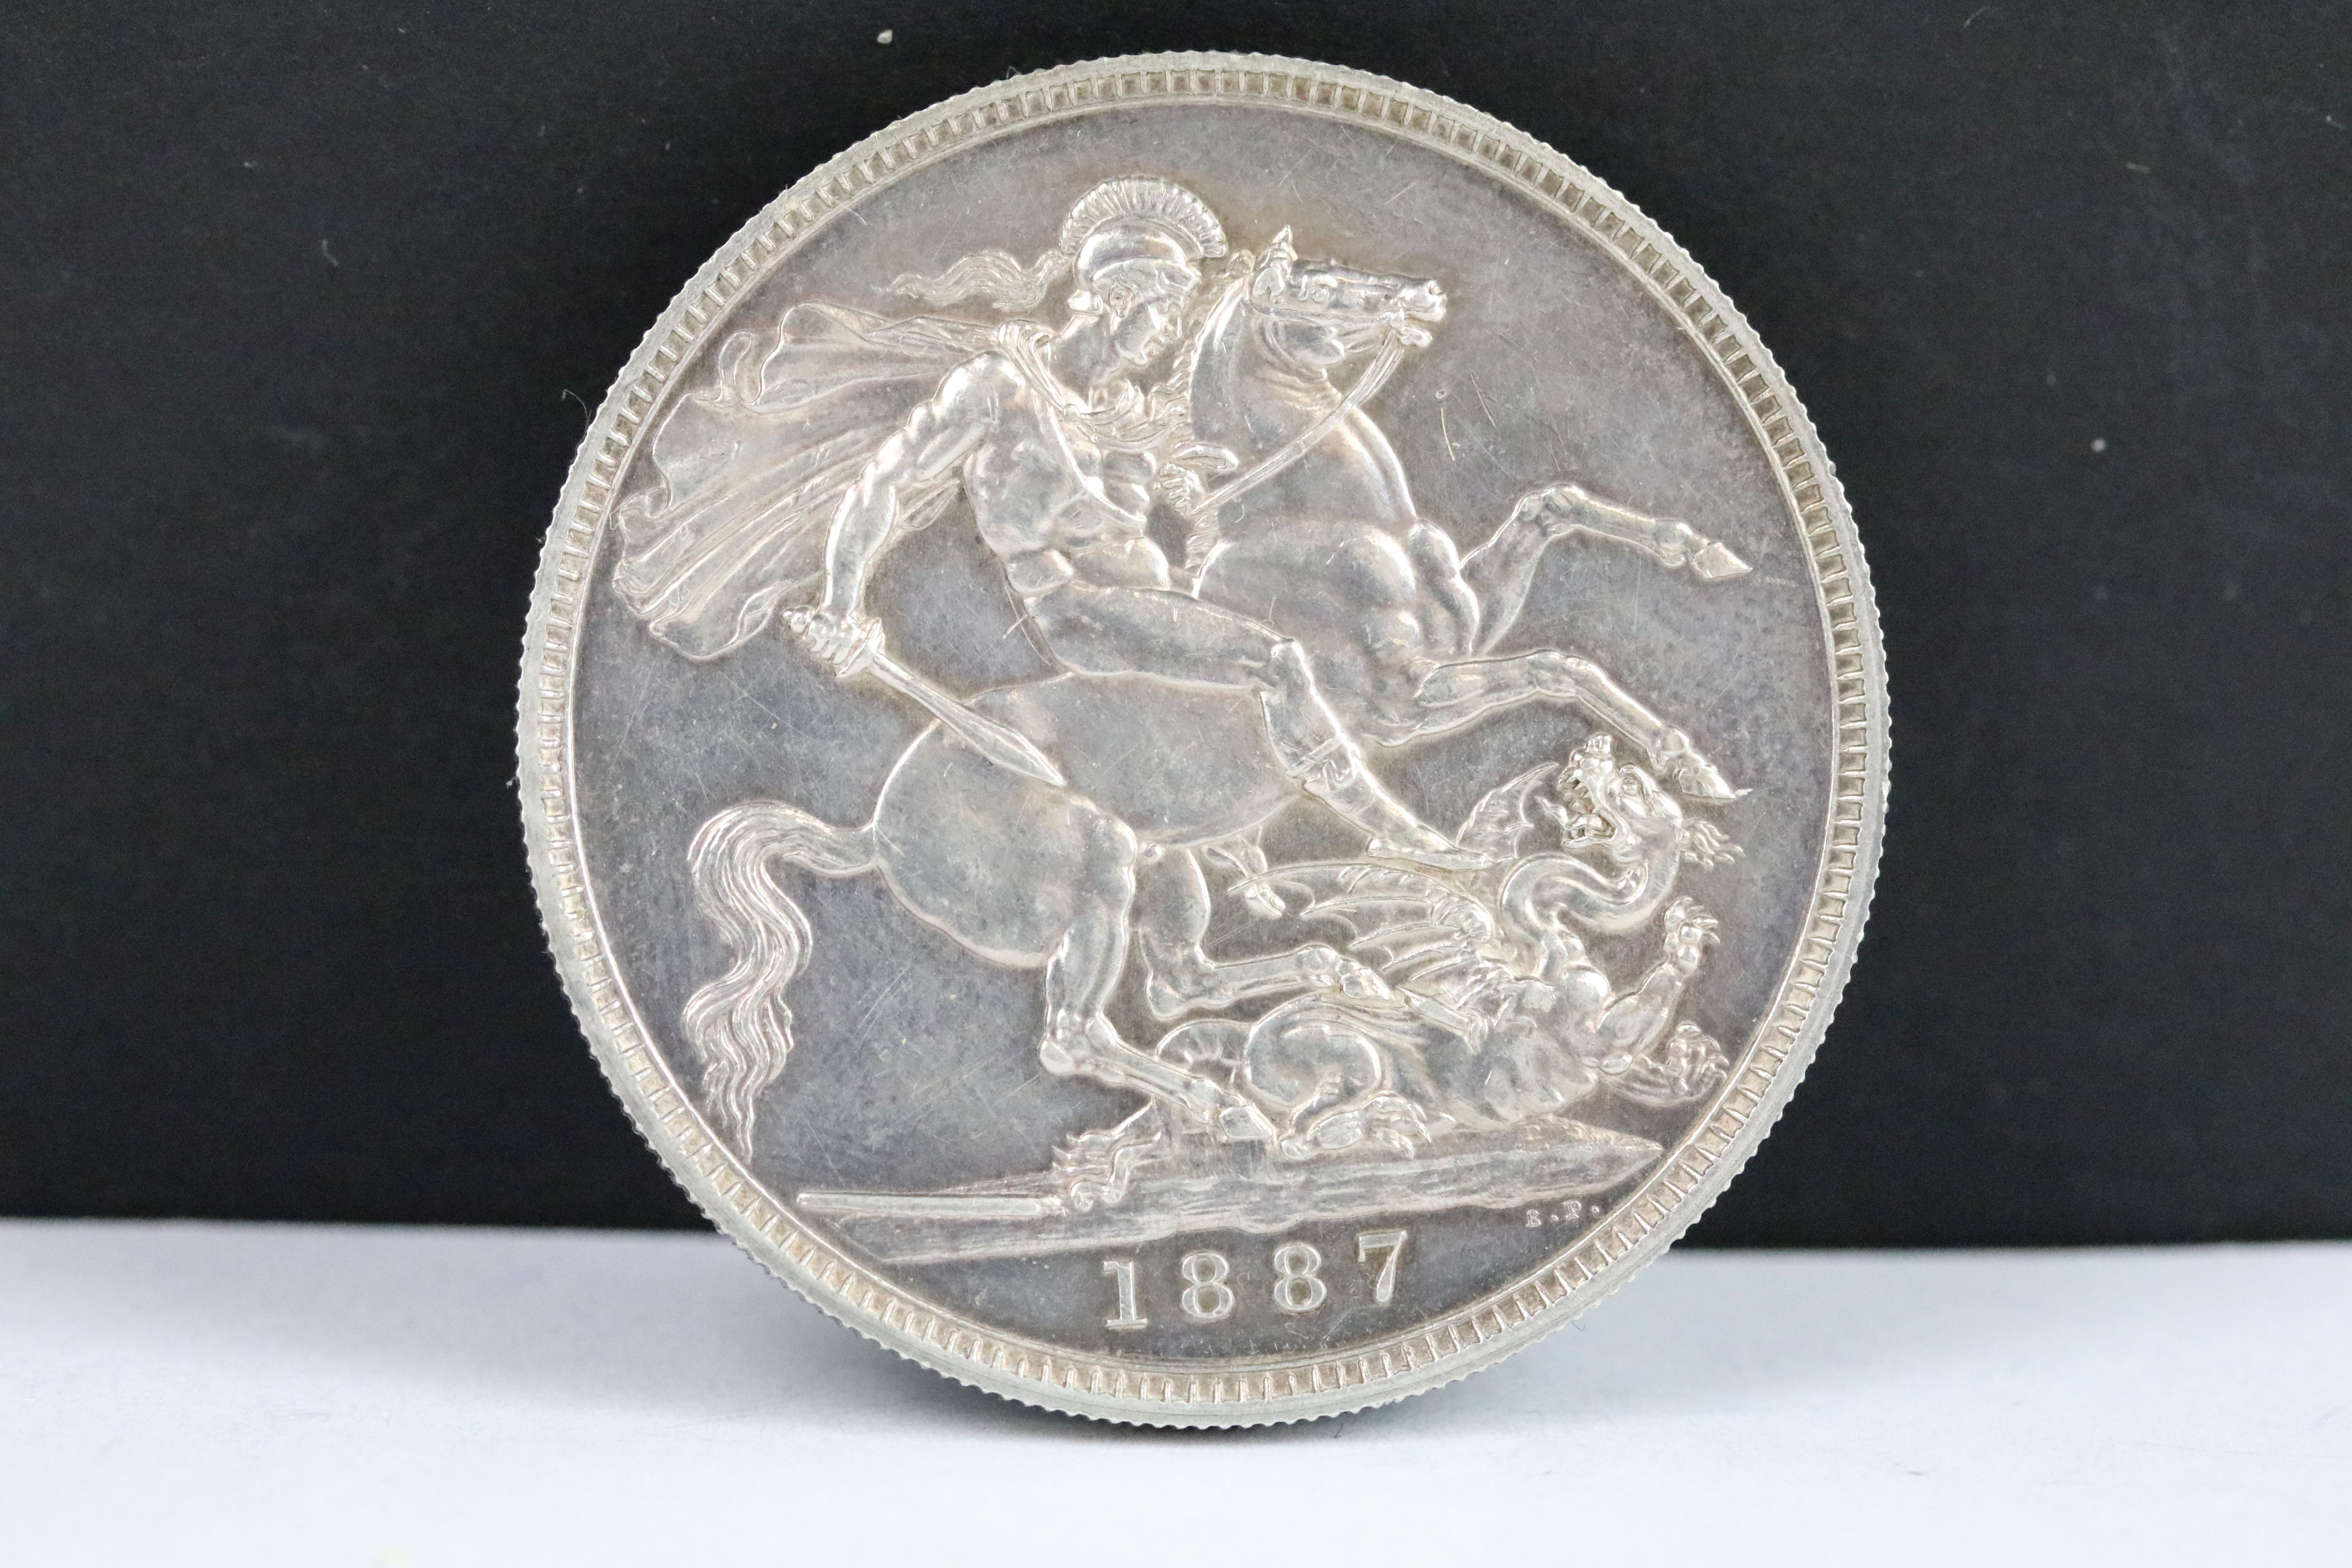 A collection of three British Queen Victoria silver Crown coins to include 1890, 1887 and 1887 - Image 6 of 9